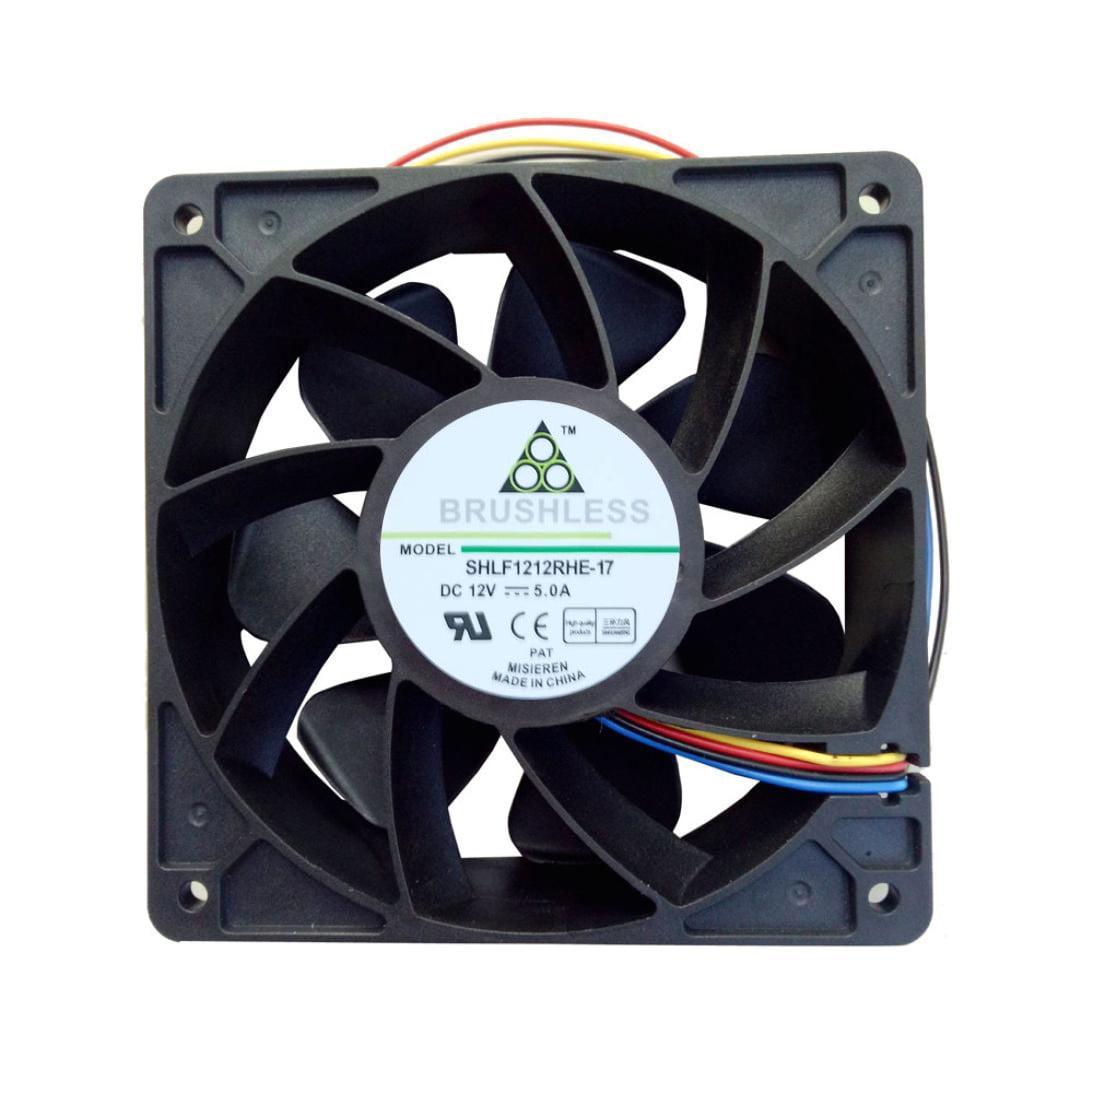 7500RPM Cooling Fan Replacement 4-pin Connector For Antminer Bitmain S7 S9 USA 